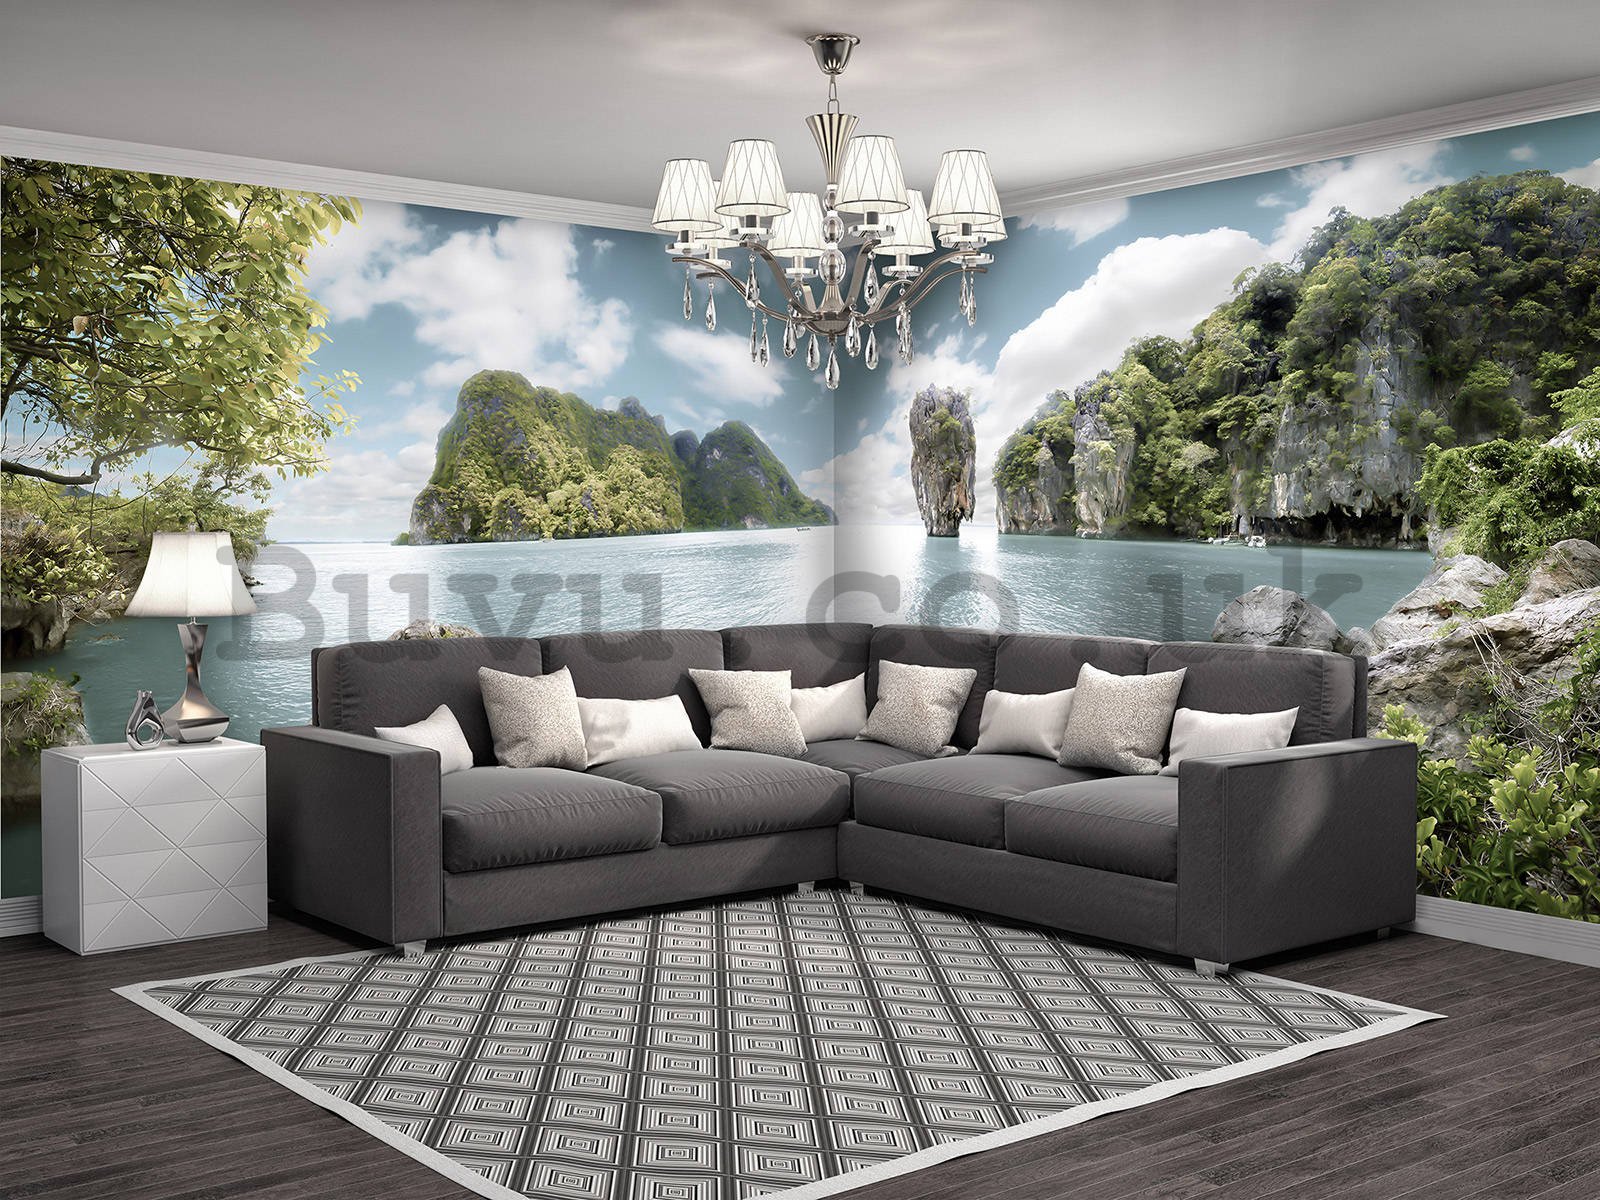 Wall mural: Landscape in the sea - 624x219 cm